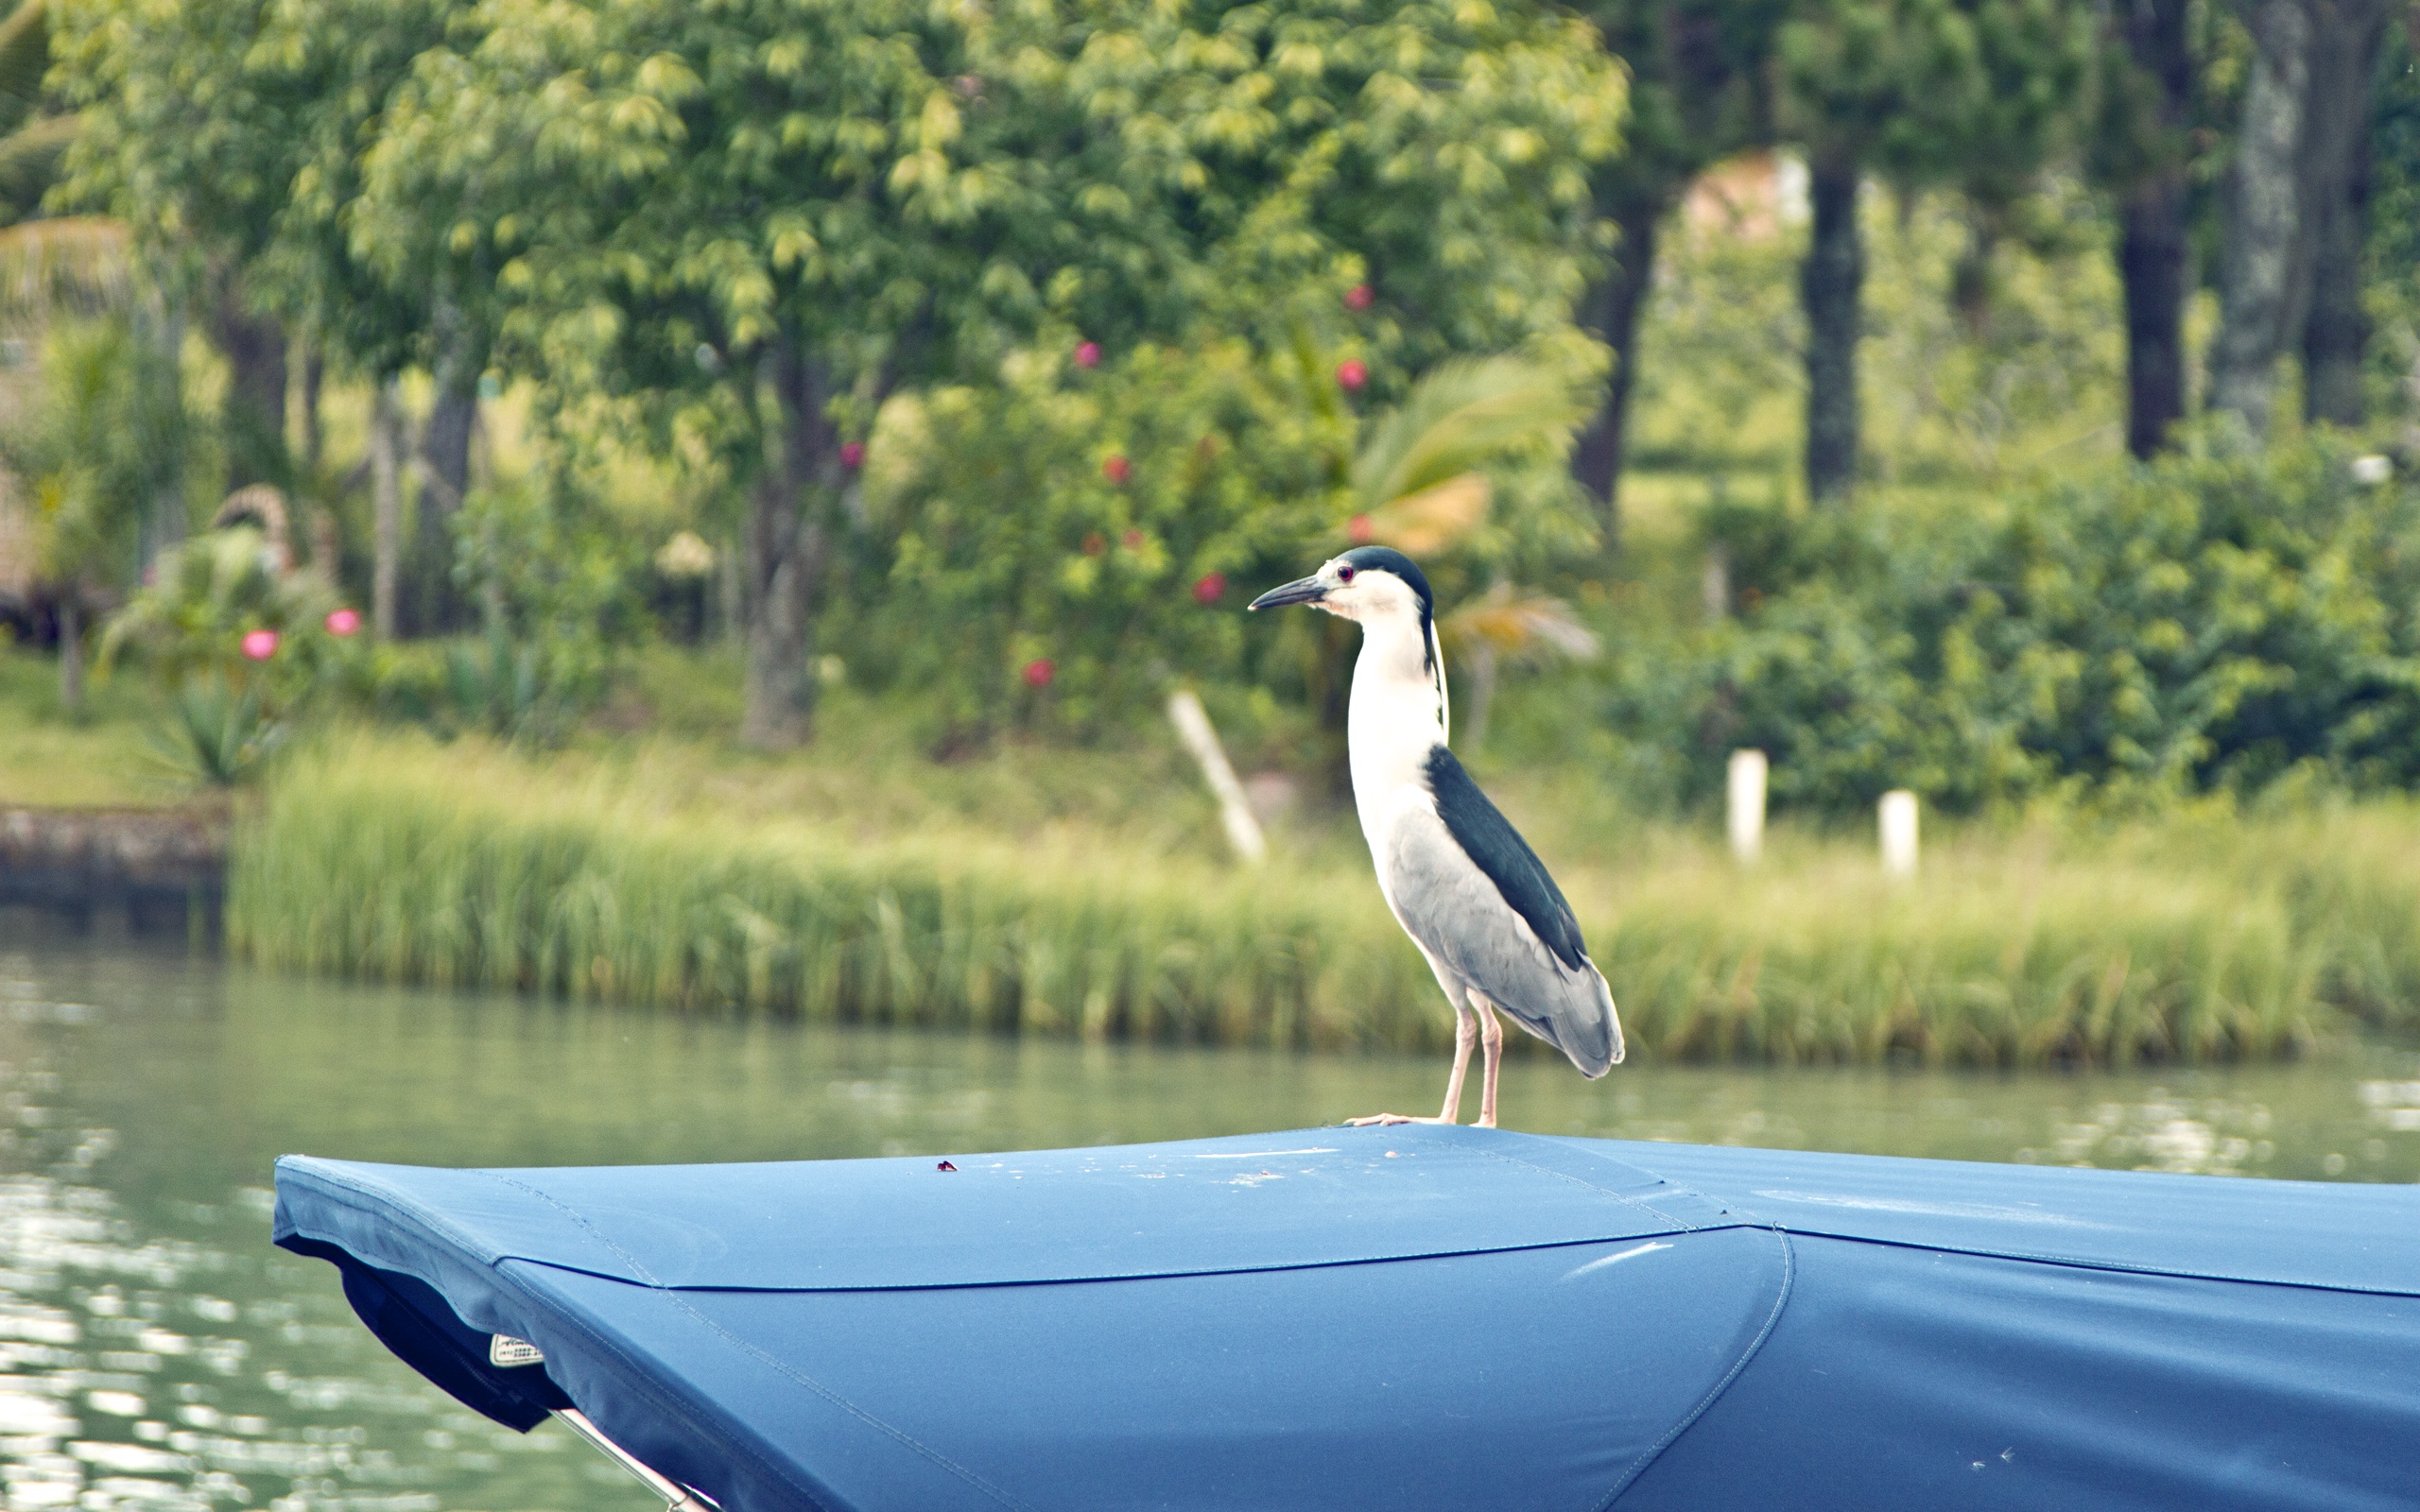 Bird perched on a boat with tranquil waters and blue skies